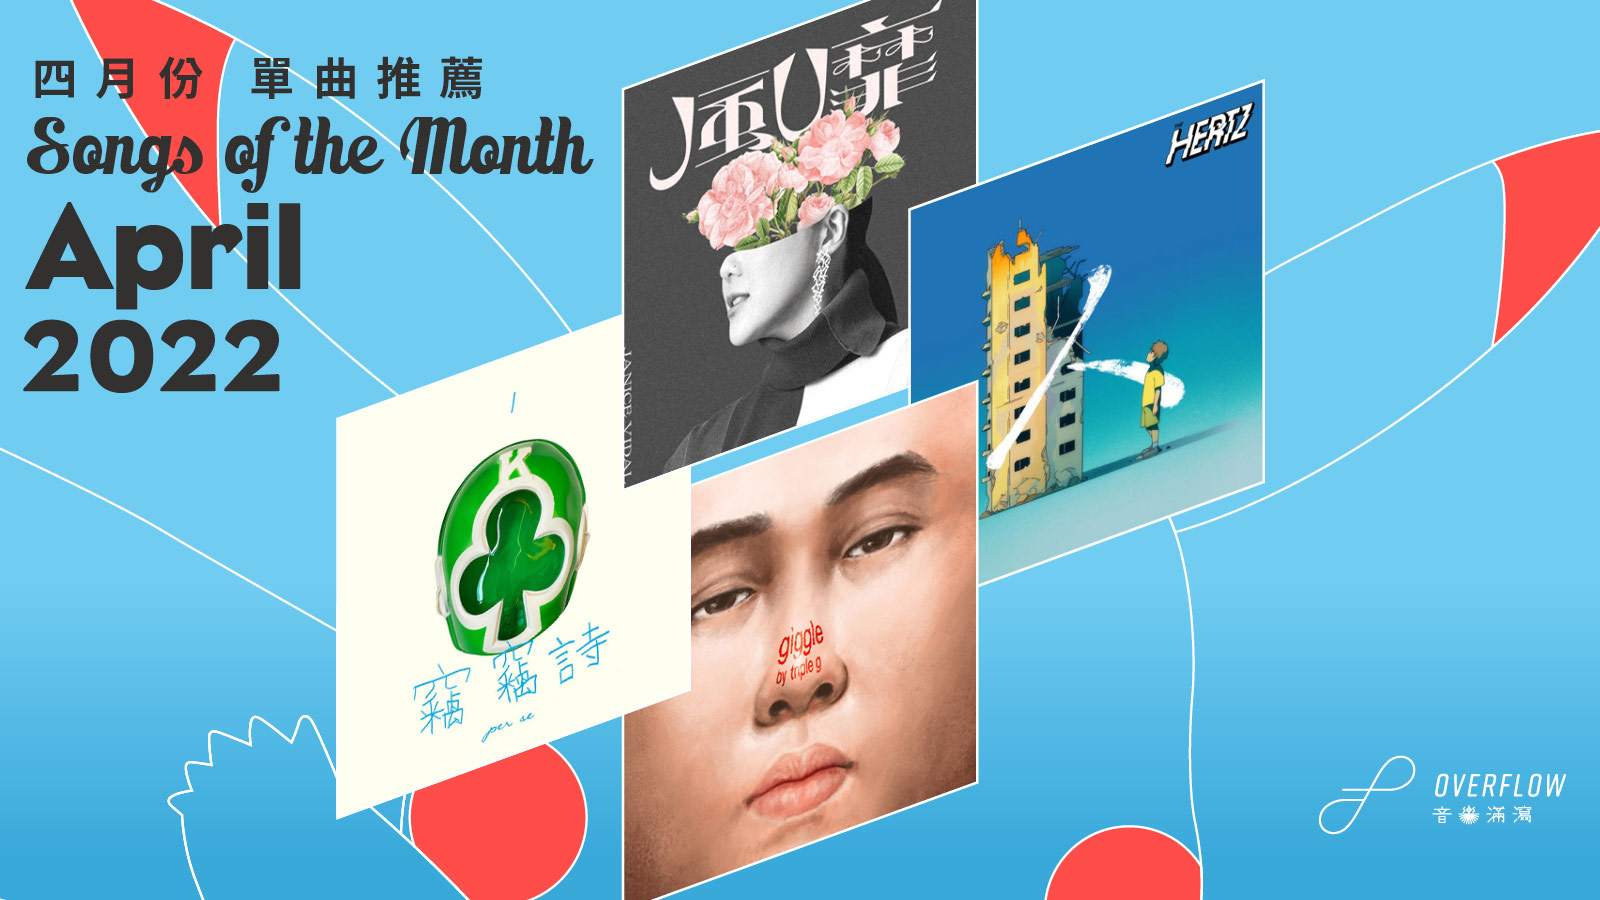 【Songs of the Month】2022 年 4 月本地歌曲推薦